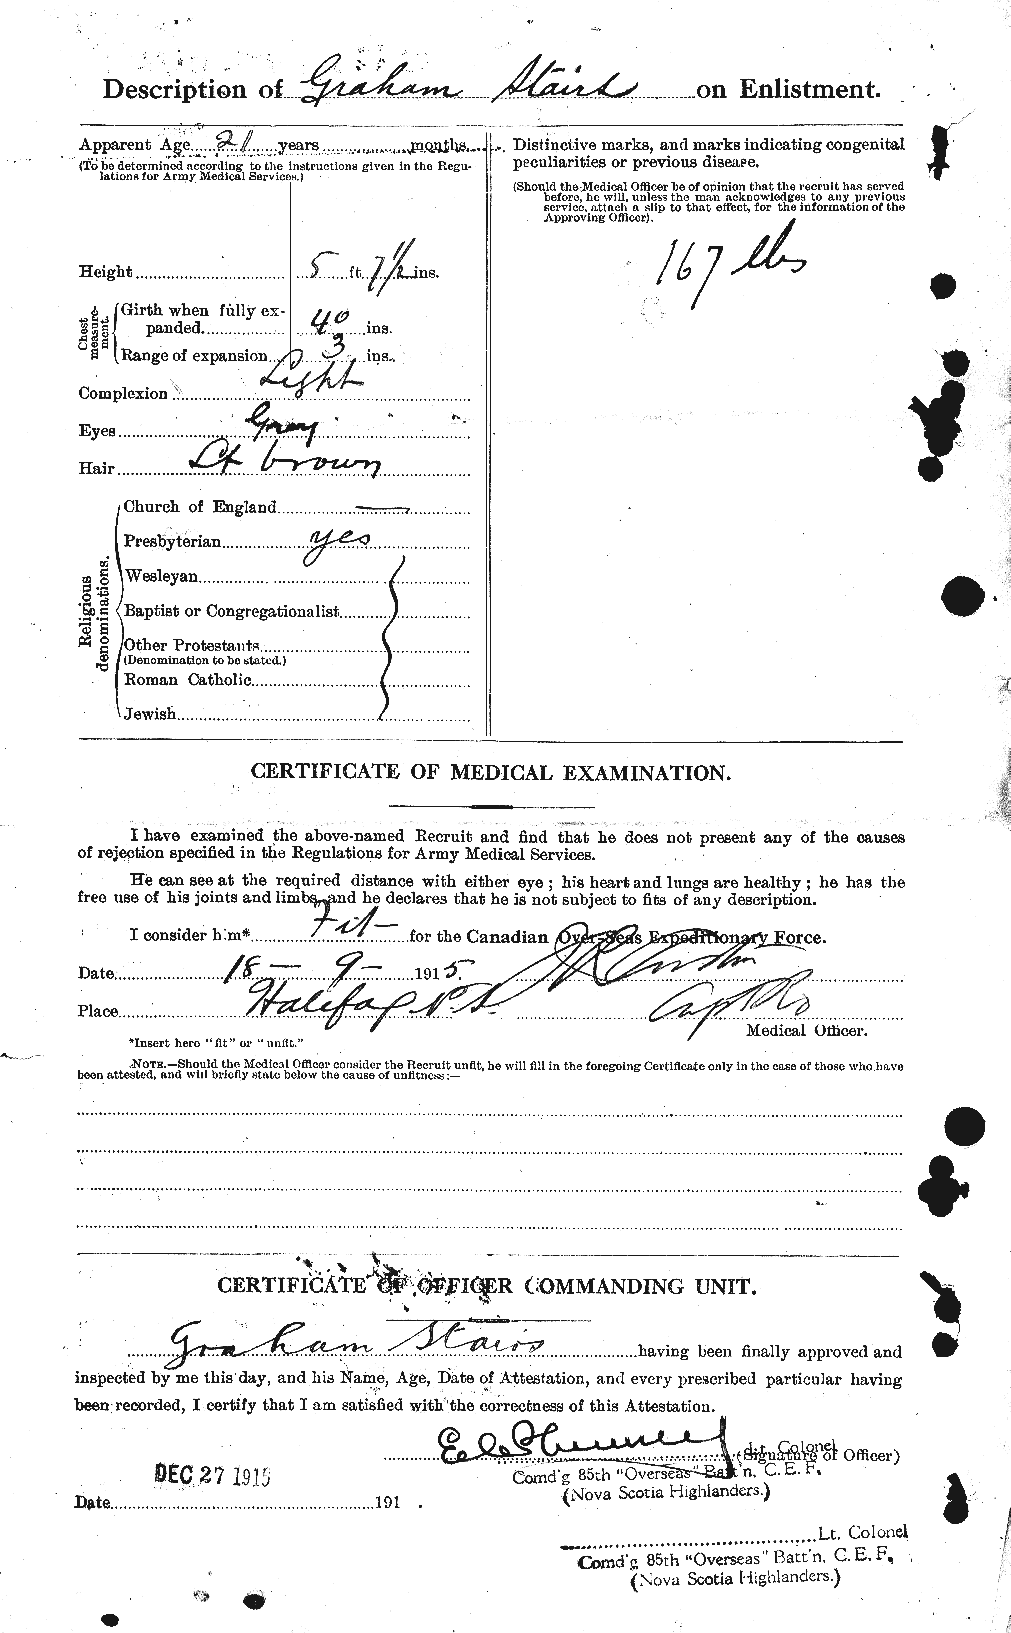 Personnel Records of the First World War - CEF 116810b